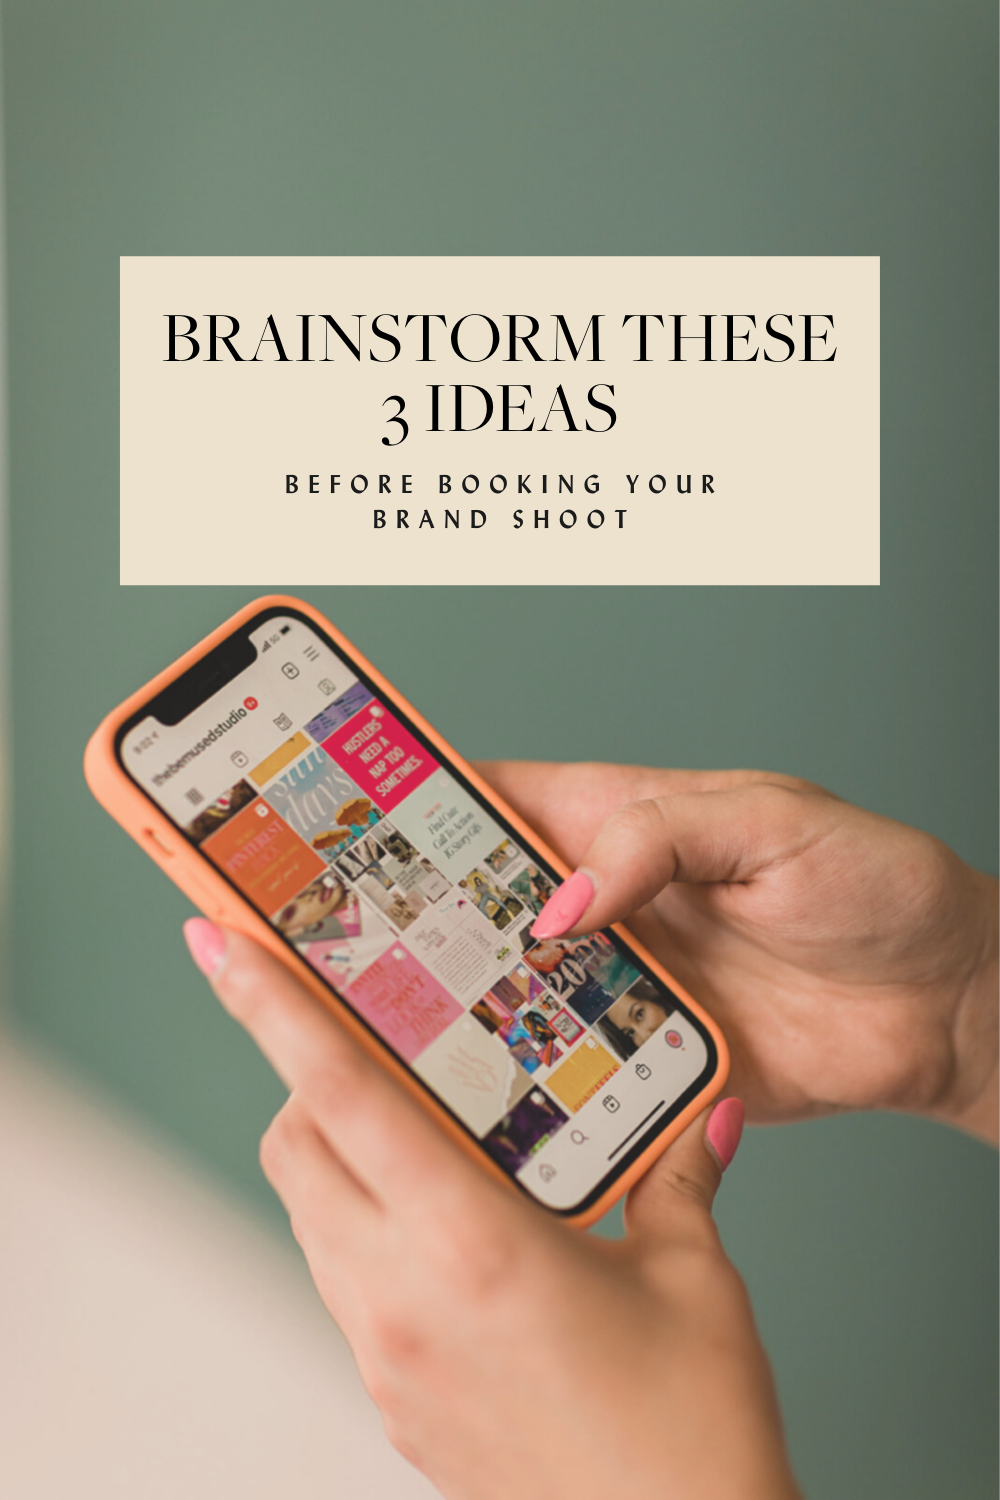 Brainstorm These 3 Ideas Before Booking Your Brand Shoot